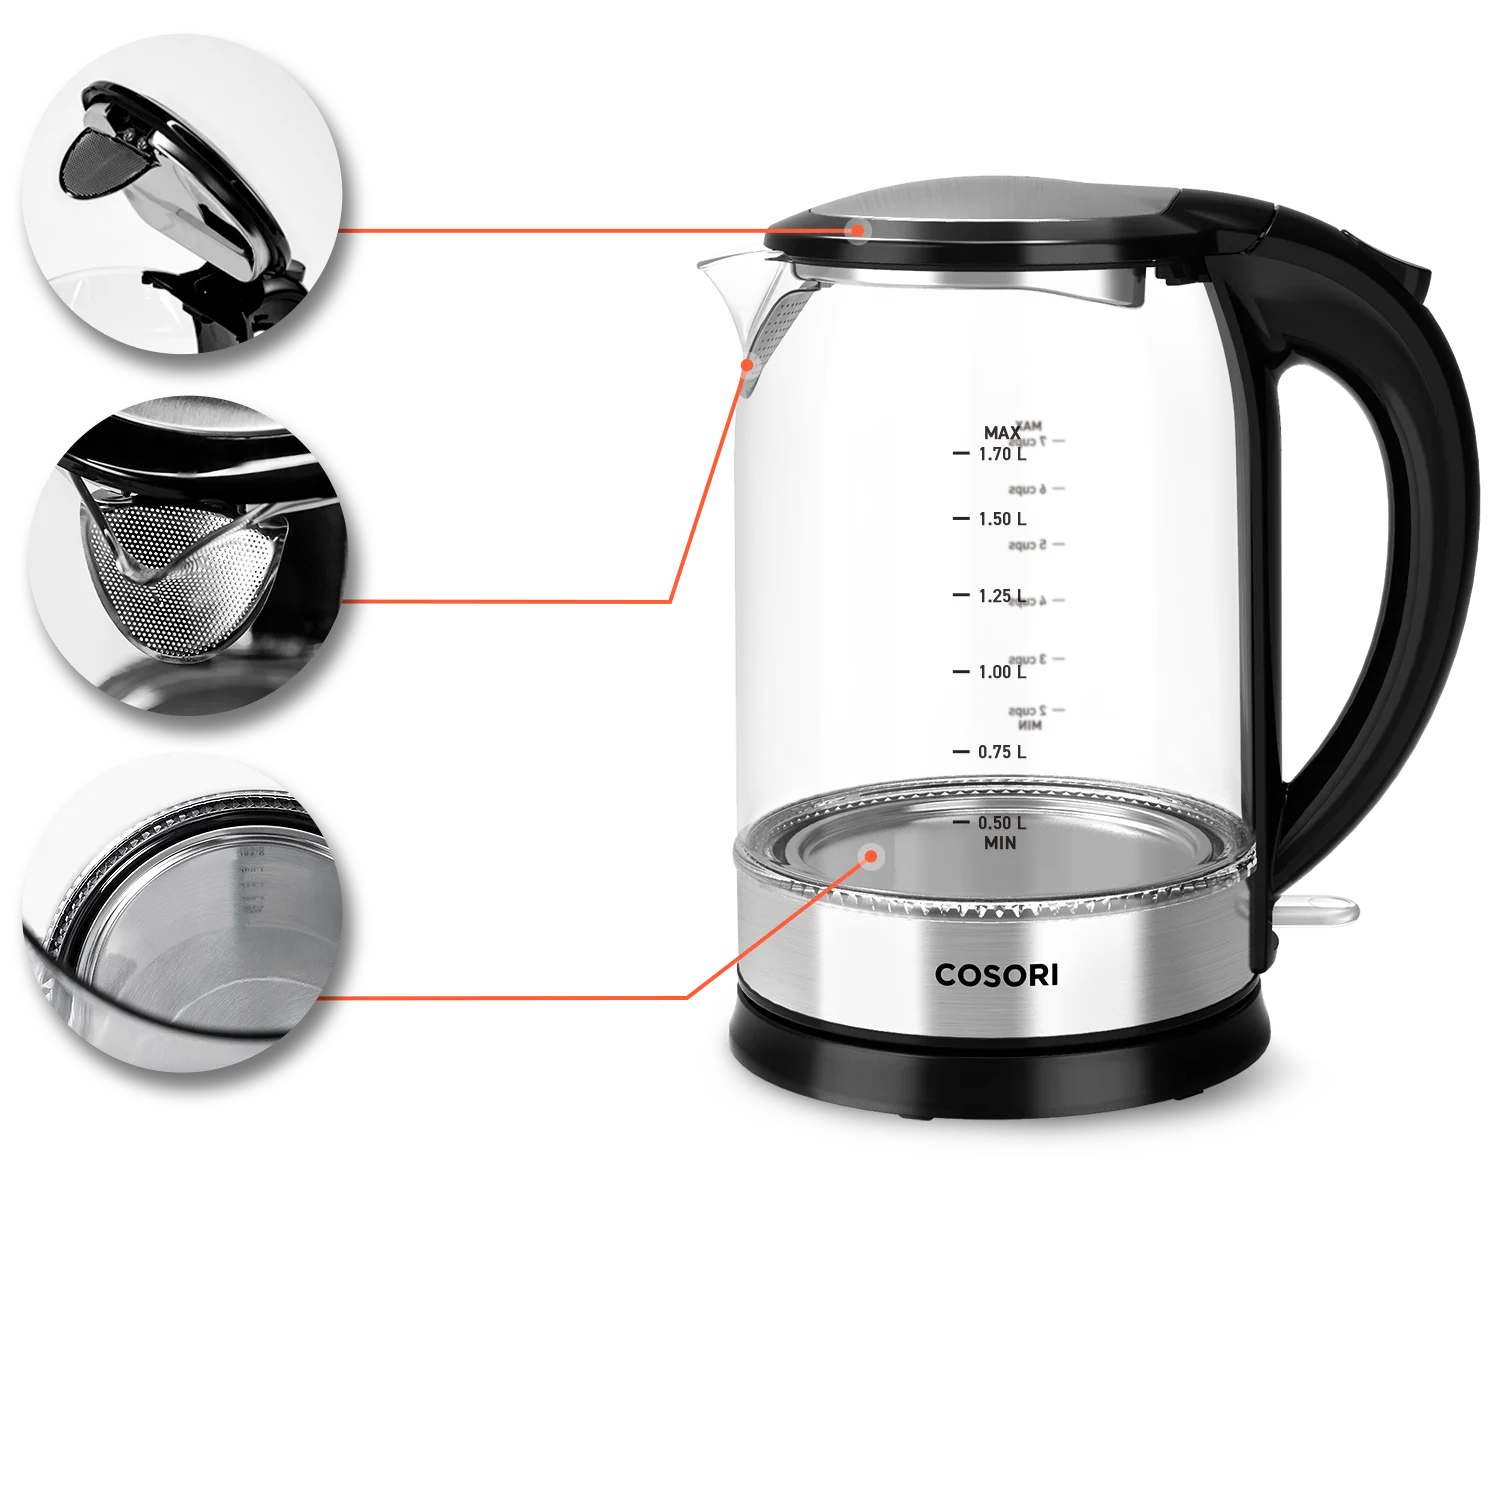  COSORI Electric Kettle Stainless Steel Interior Double Wall,  Wide-Open Lid 1.5L 1500W Electric Tea Kettle, BPA Free Kettle Water Boiler  & Hot Water Kettle, Auto Shut-Off & Boil-Dry Protection, Black: Home